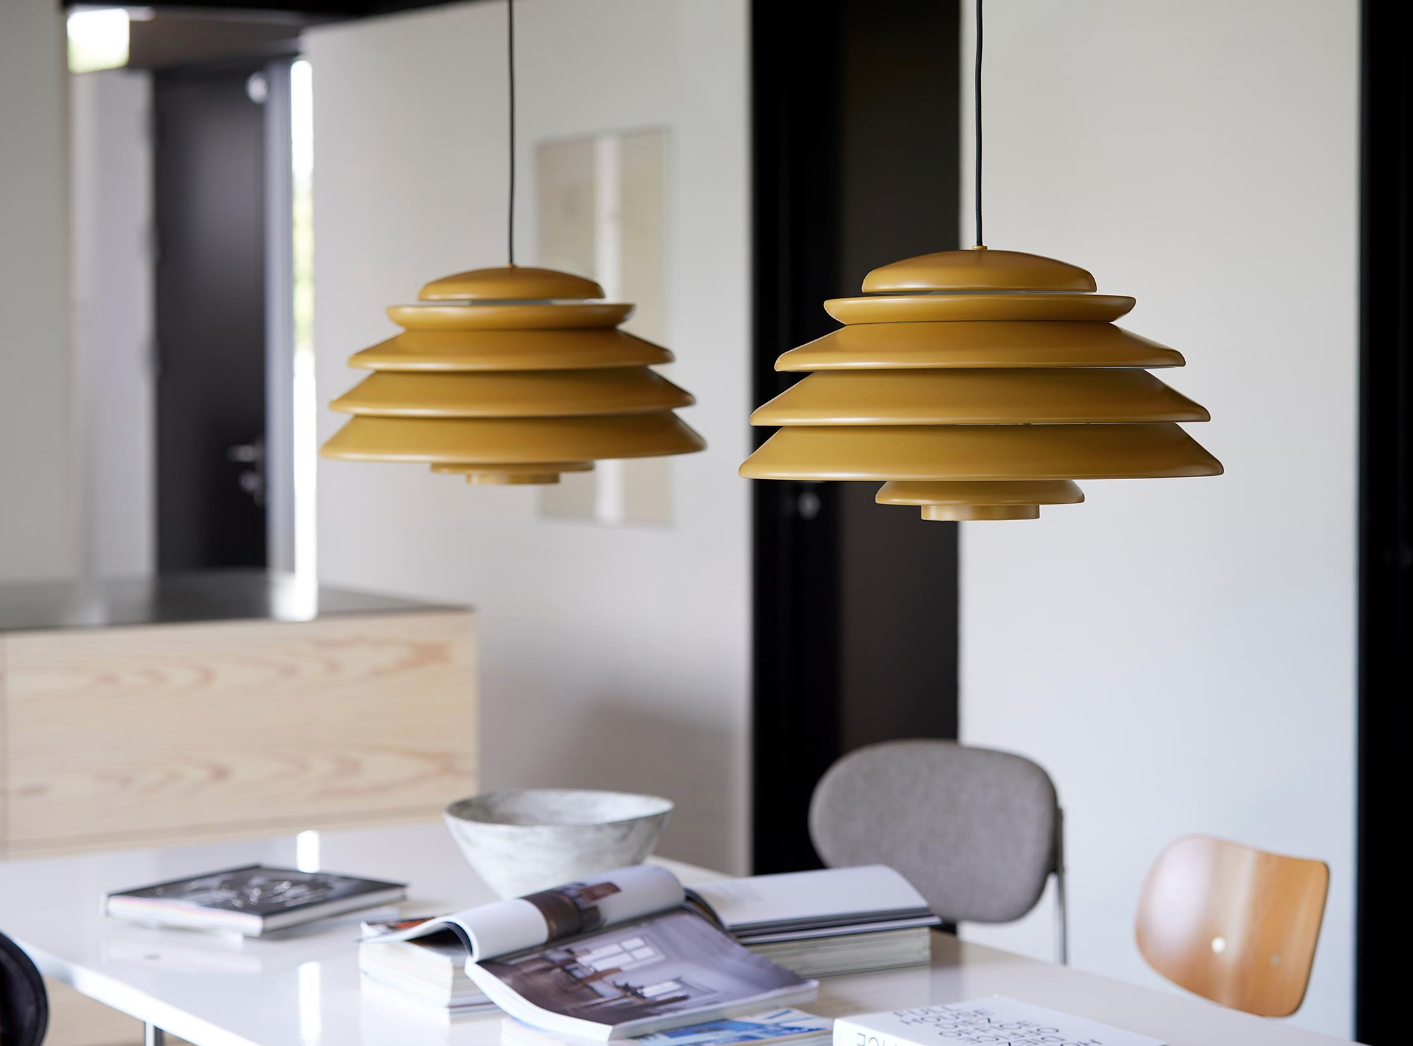 Hive Pendant light by Verpan with Morlen Sinoway